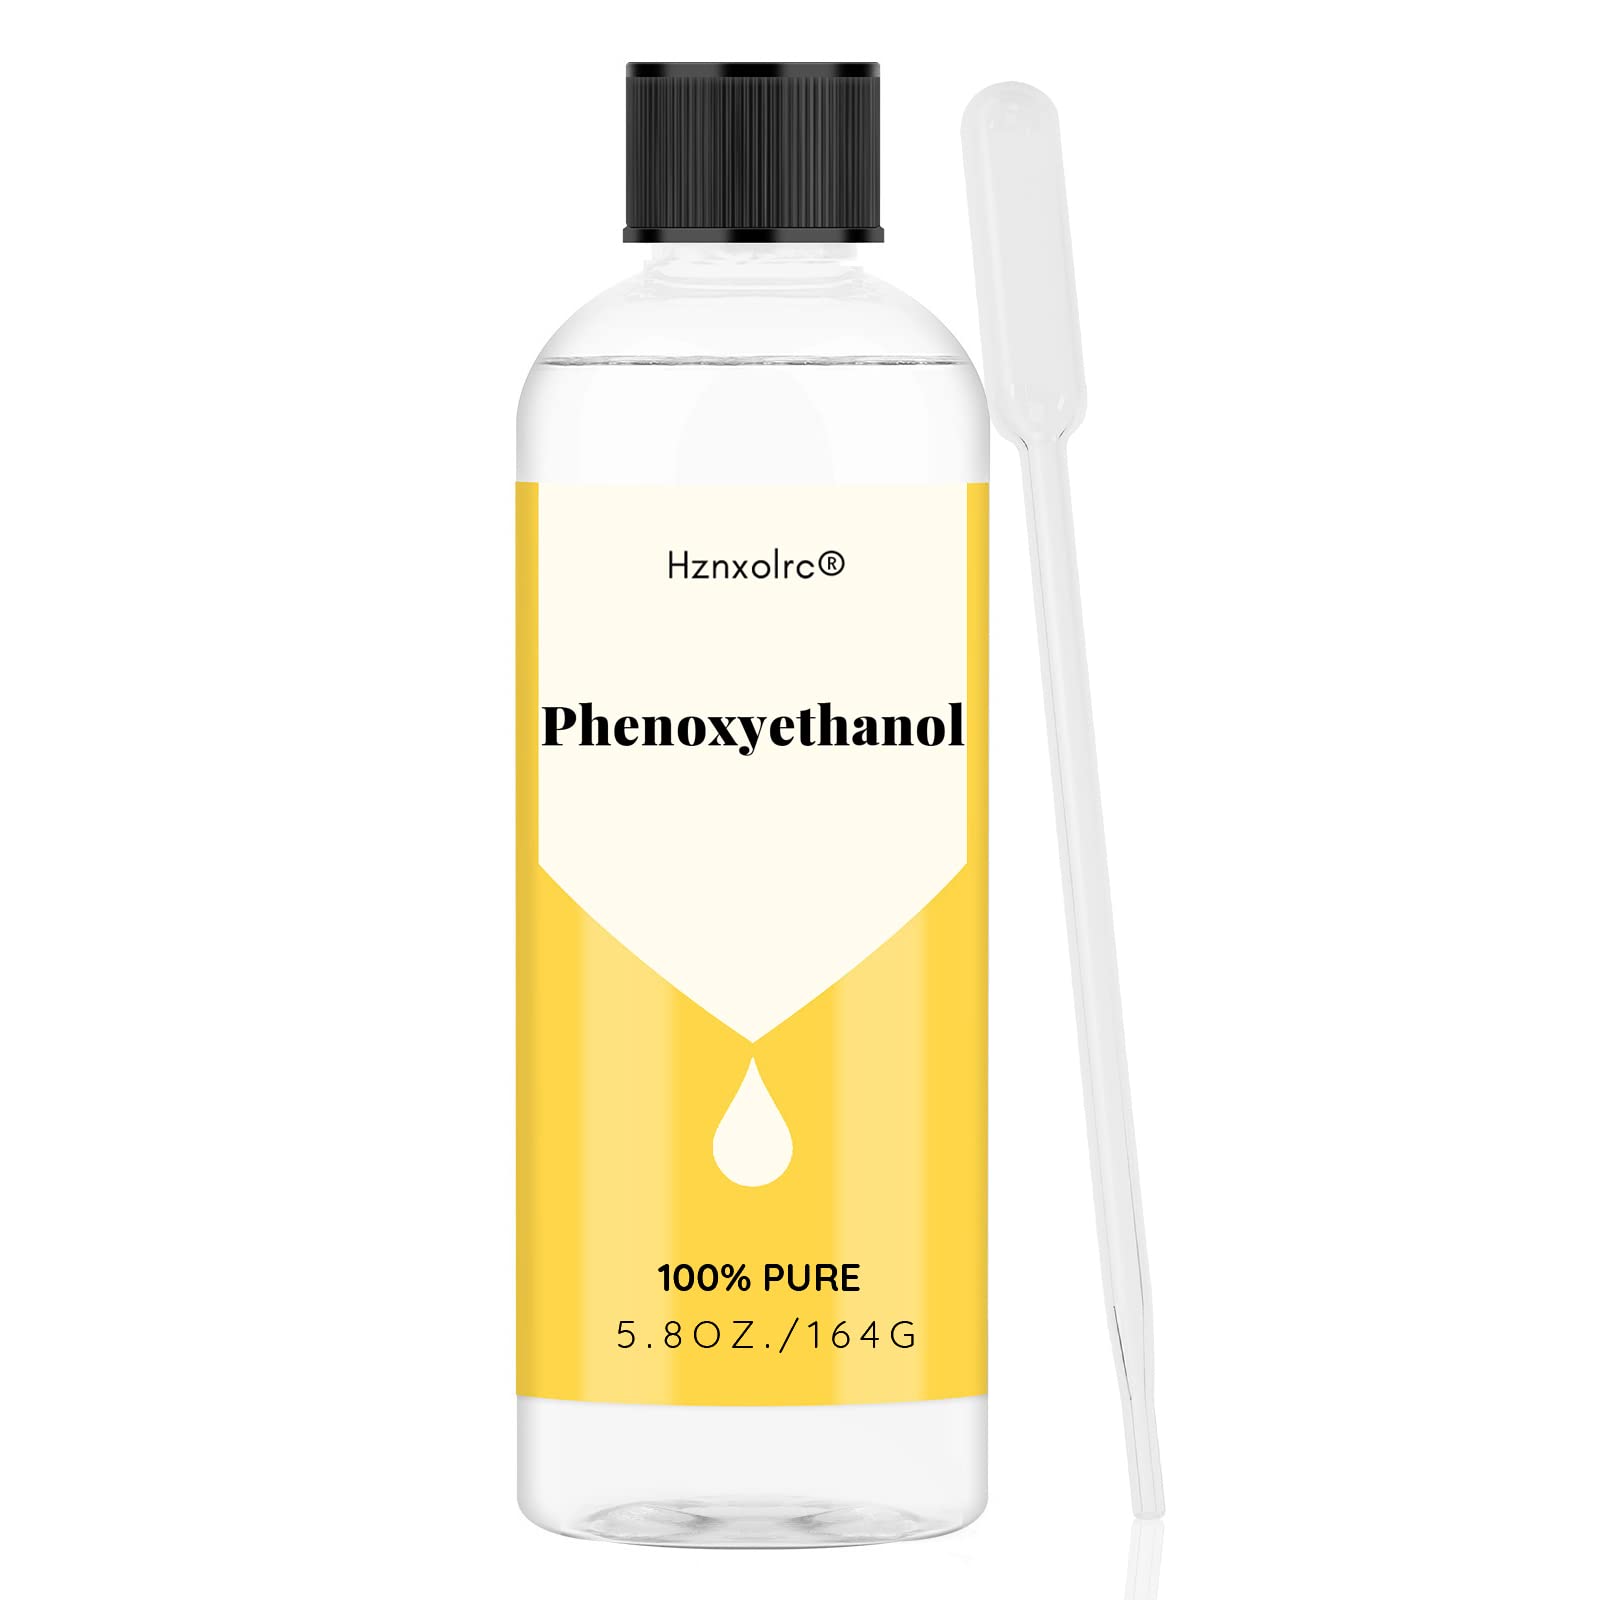 Hznxolrc 5.8oz Phenoxyethanol Preservative Liquid Premium Liquid  Preservative Cosmetic Grade Phenoxyethanol Suitable for Making Soap  Conditioners Lotion Creams and More